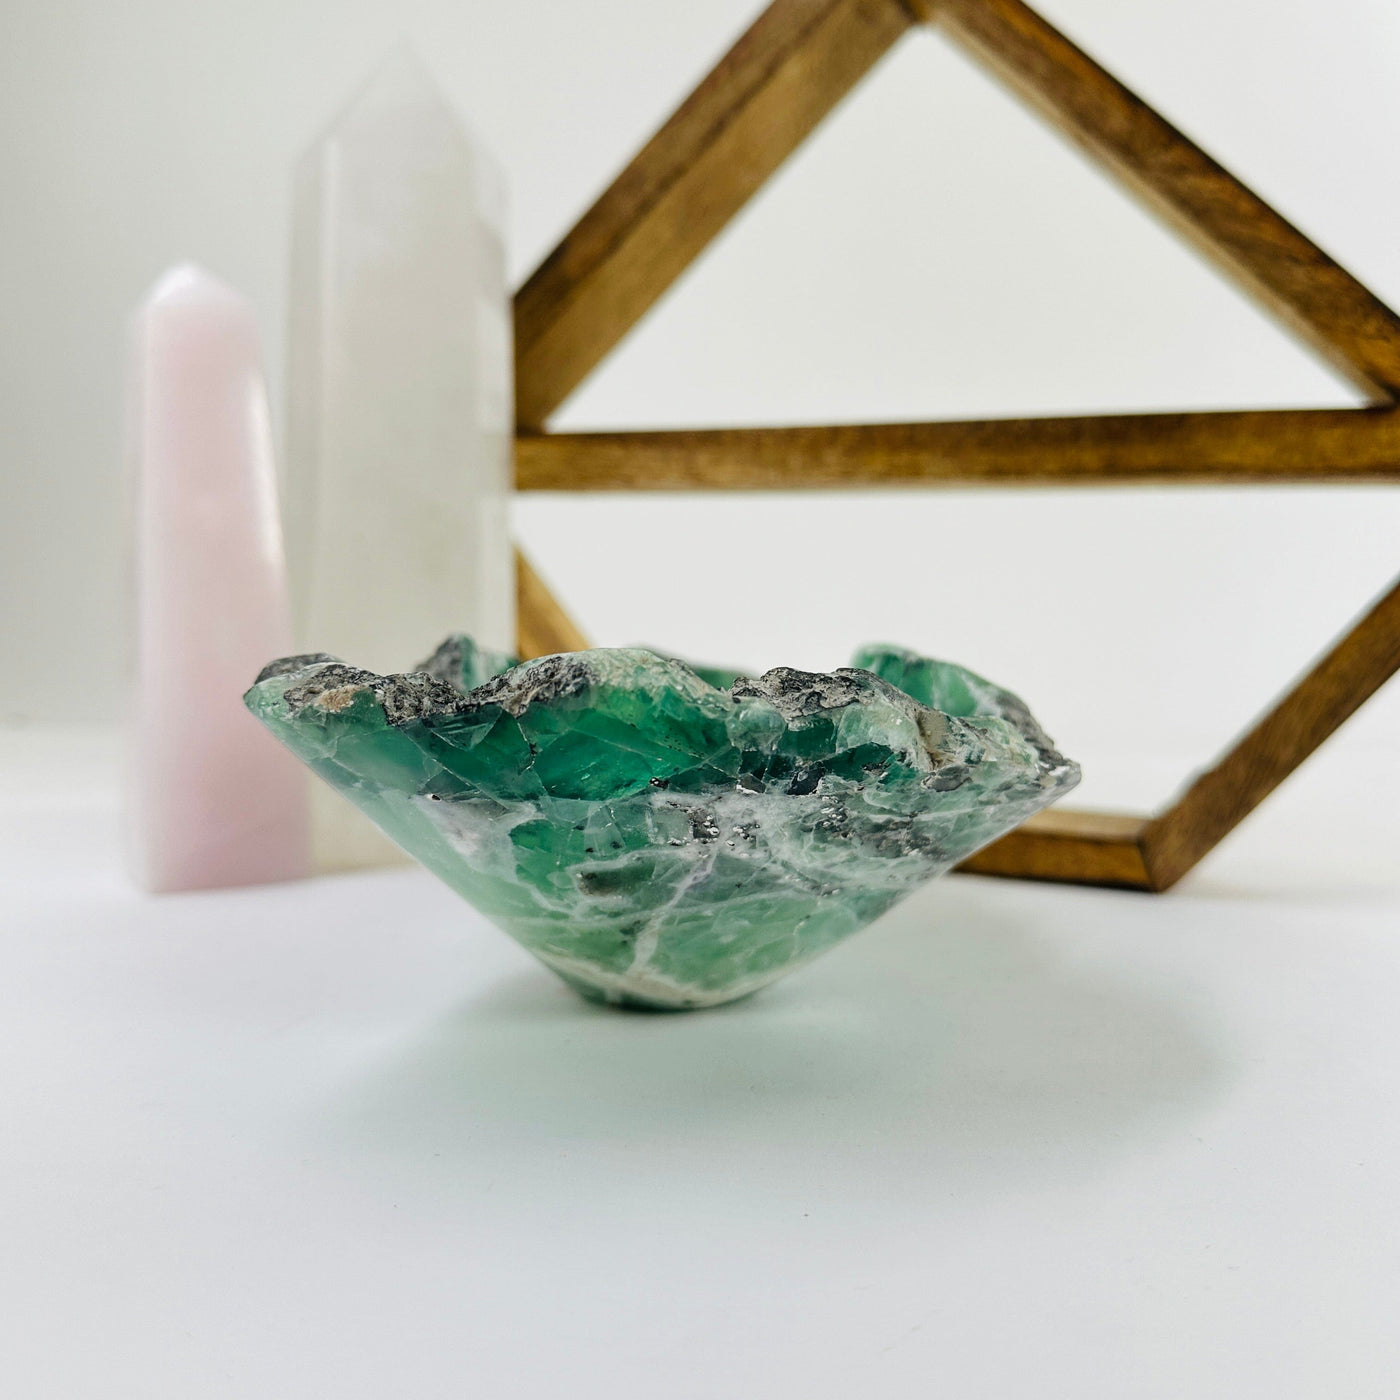 fluorite bowl with decorations in the background